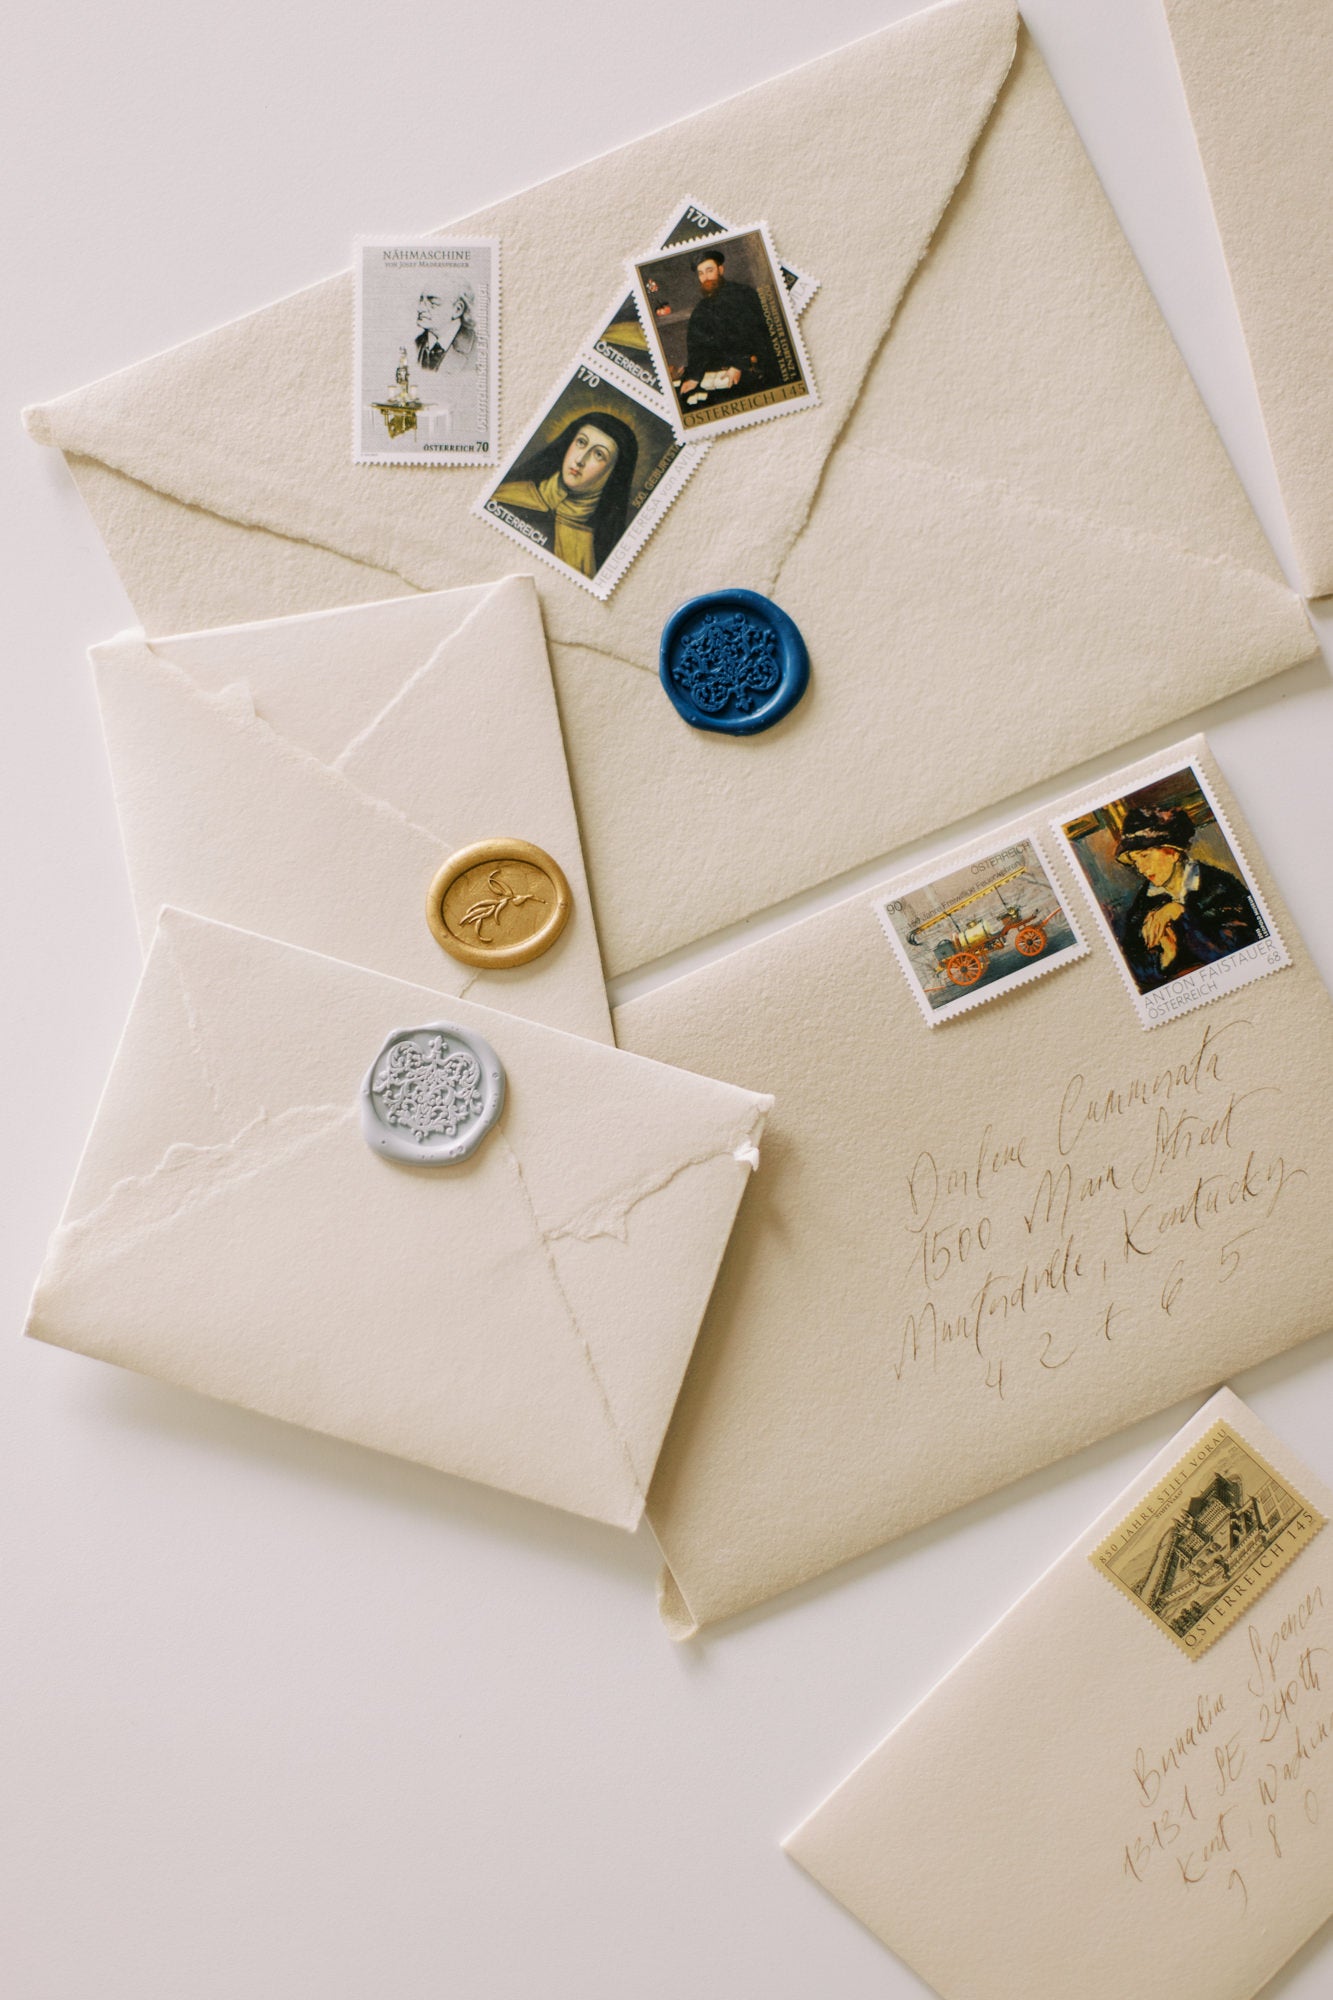 Show your dedication to preserving quality with hand-canceling postage, keeping your exclusive handmade paper intact.